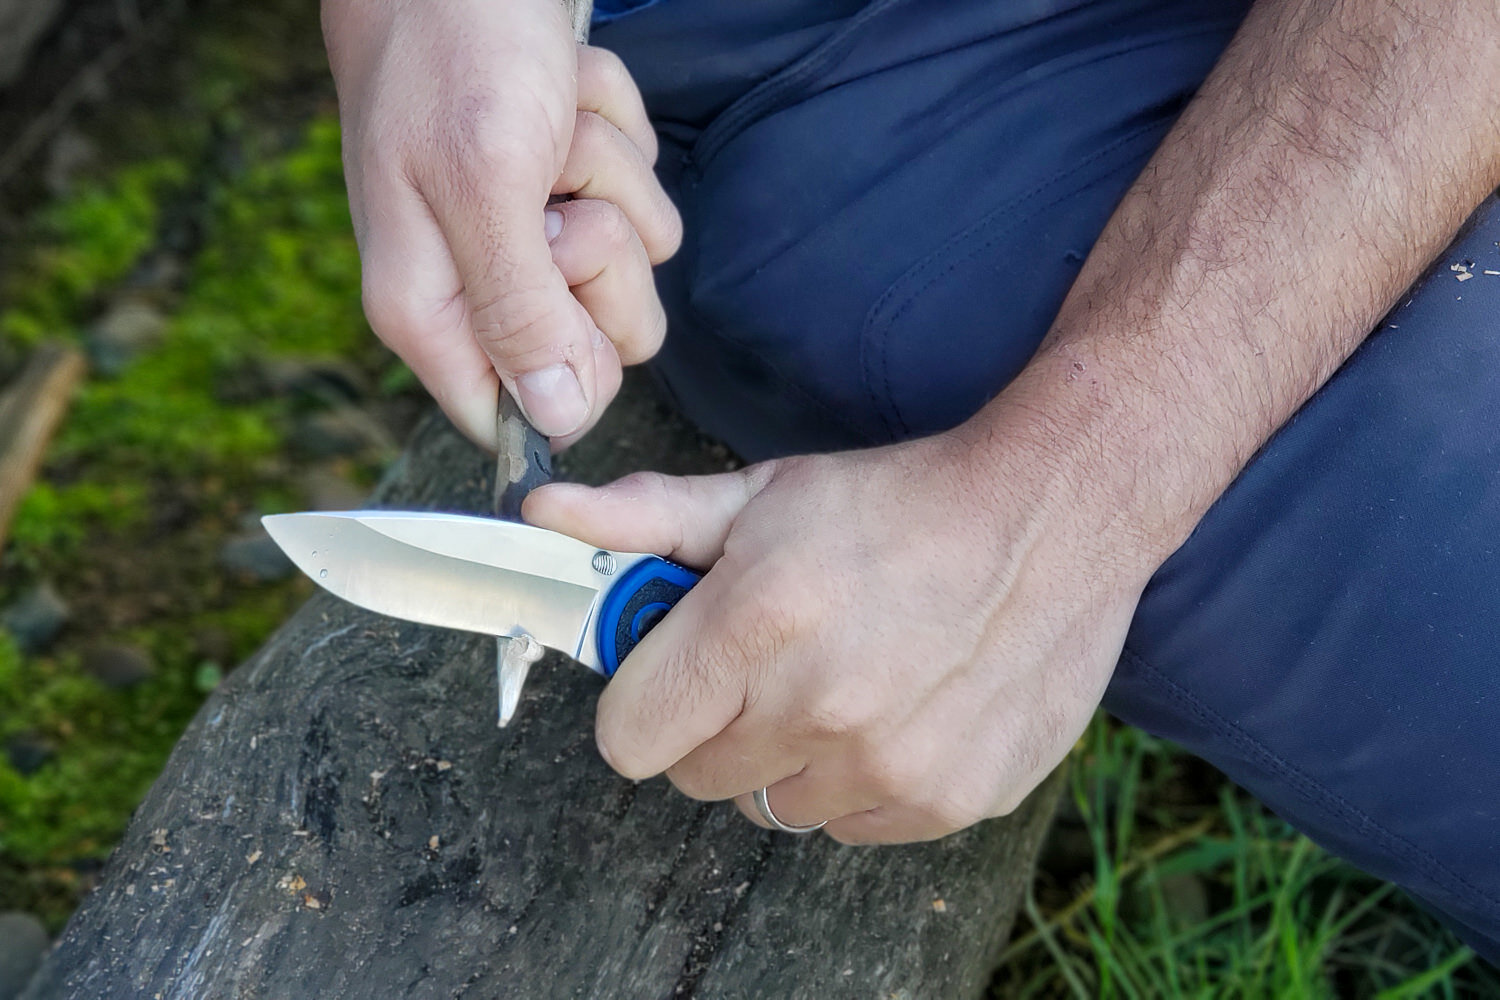 We love the Kershaw Blur because it’s easy to open, it has an ergonomic, Grippy handle, & it’s a great value for the price